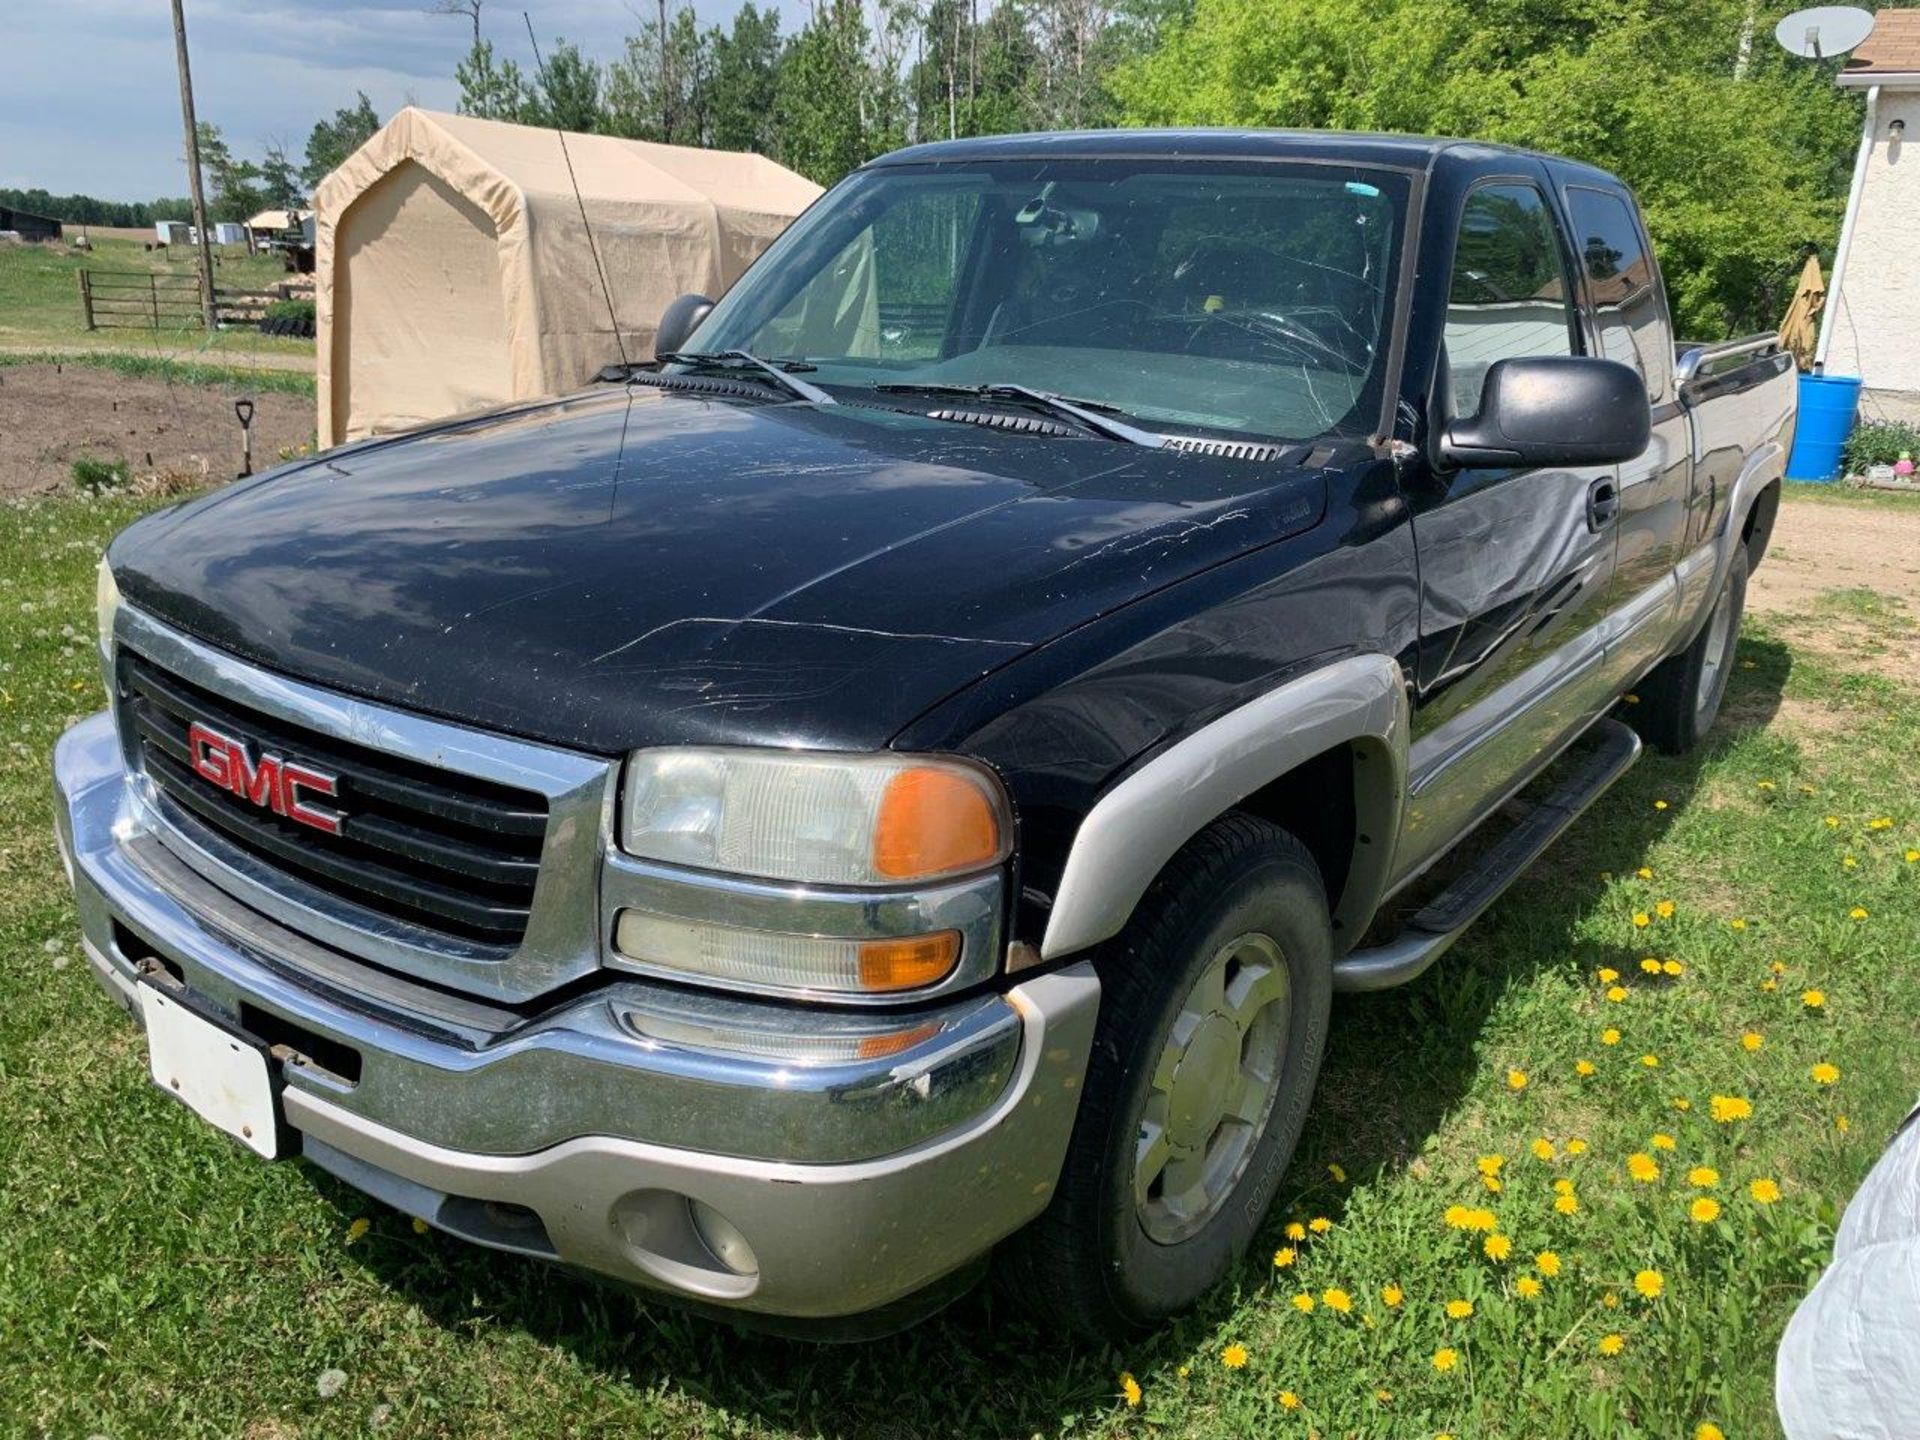 2005 GMC SIERRA Z71, SHORT BOX, EXTENDED CAB PICK UP TRUCK, 4X4, V8 AUTOMATIC 169,923 KM'S - Image 2 of 27